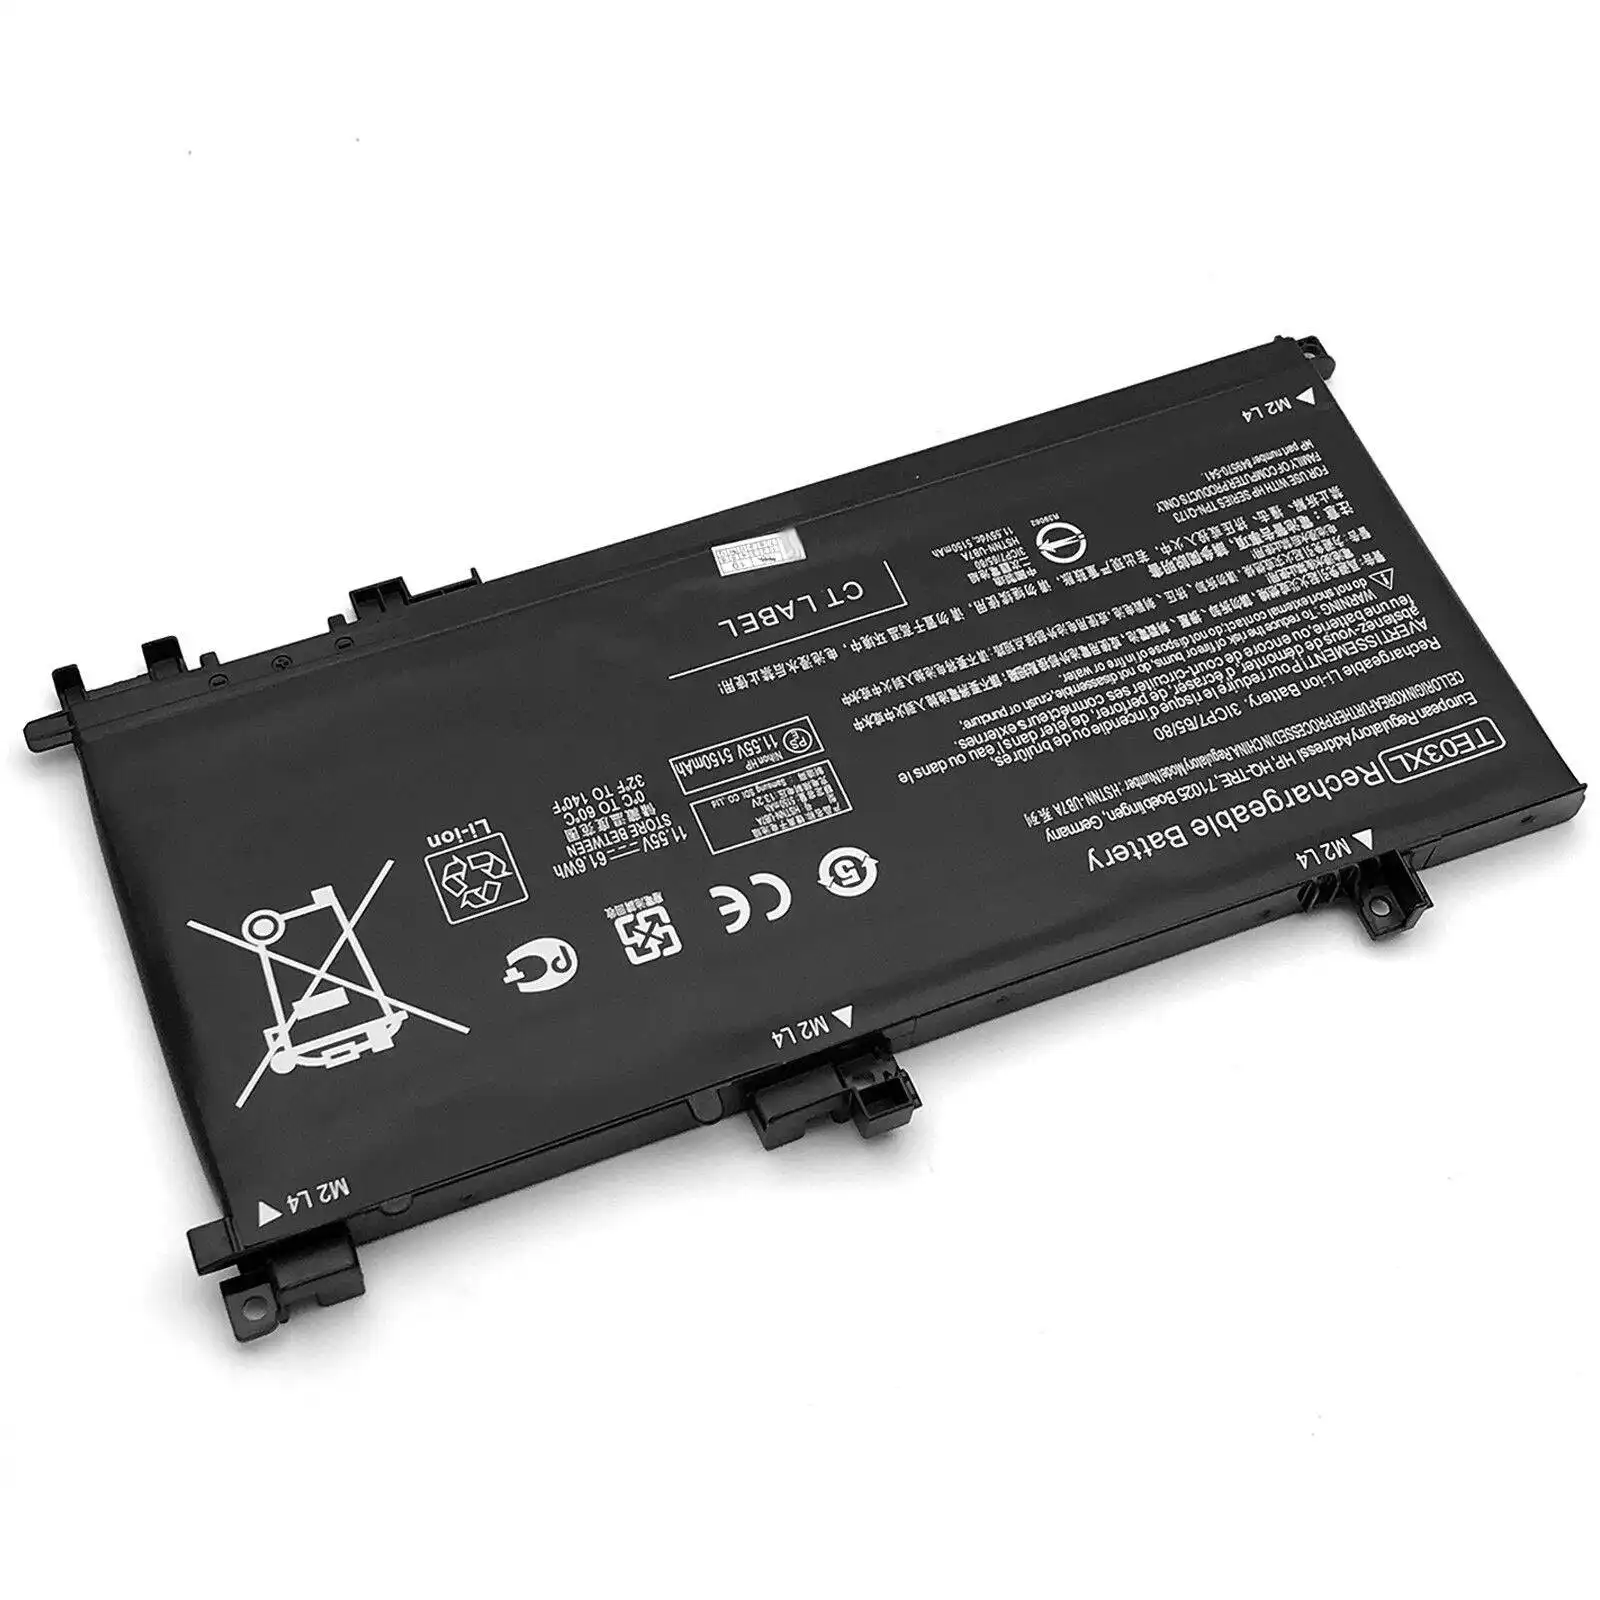 TE03XL Battery Replacement For HP Pavilion 15 BC Series Omen 15 AX Series HSTNN-UB7A 61.6Wh